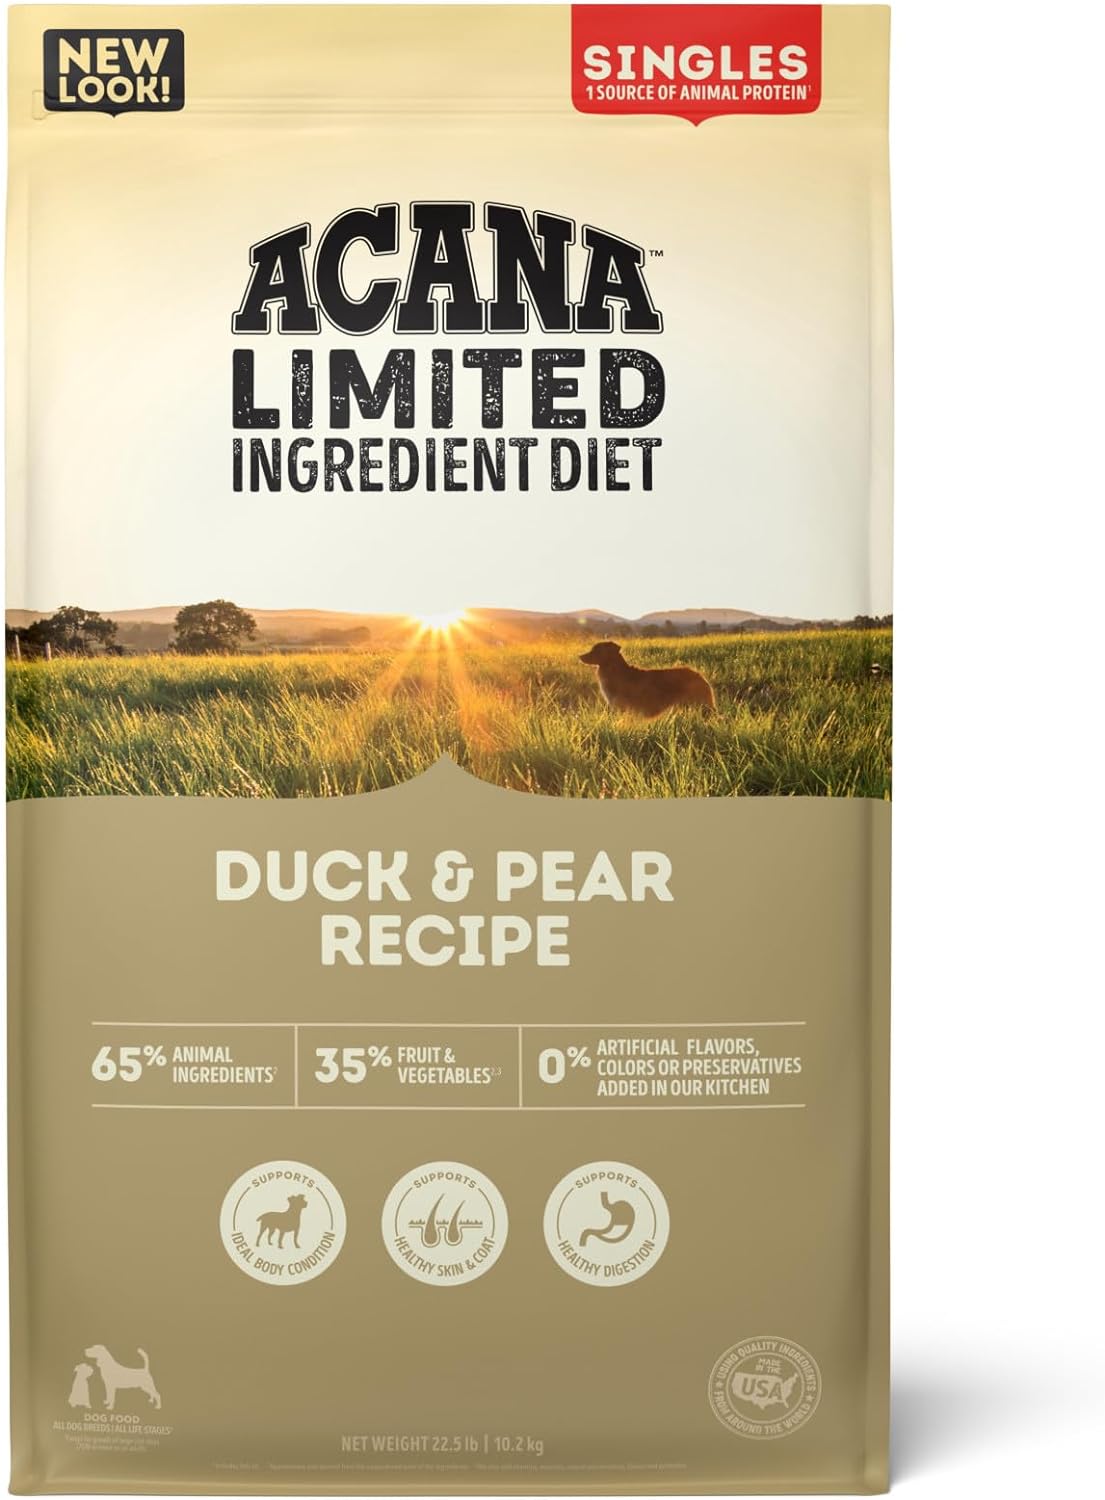 Acana Singles Limited Ingredient Diet Duck & Pear Recipe Dry Dog Food – Gallery Image 1